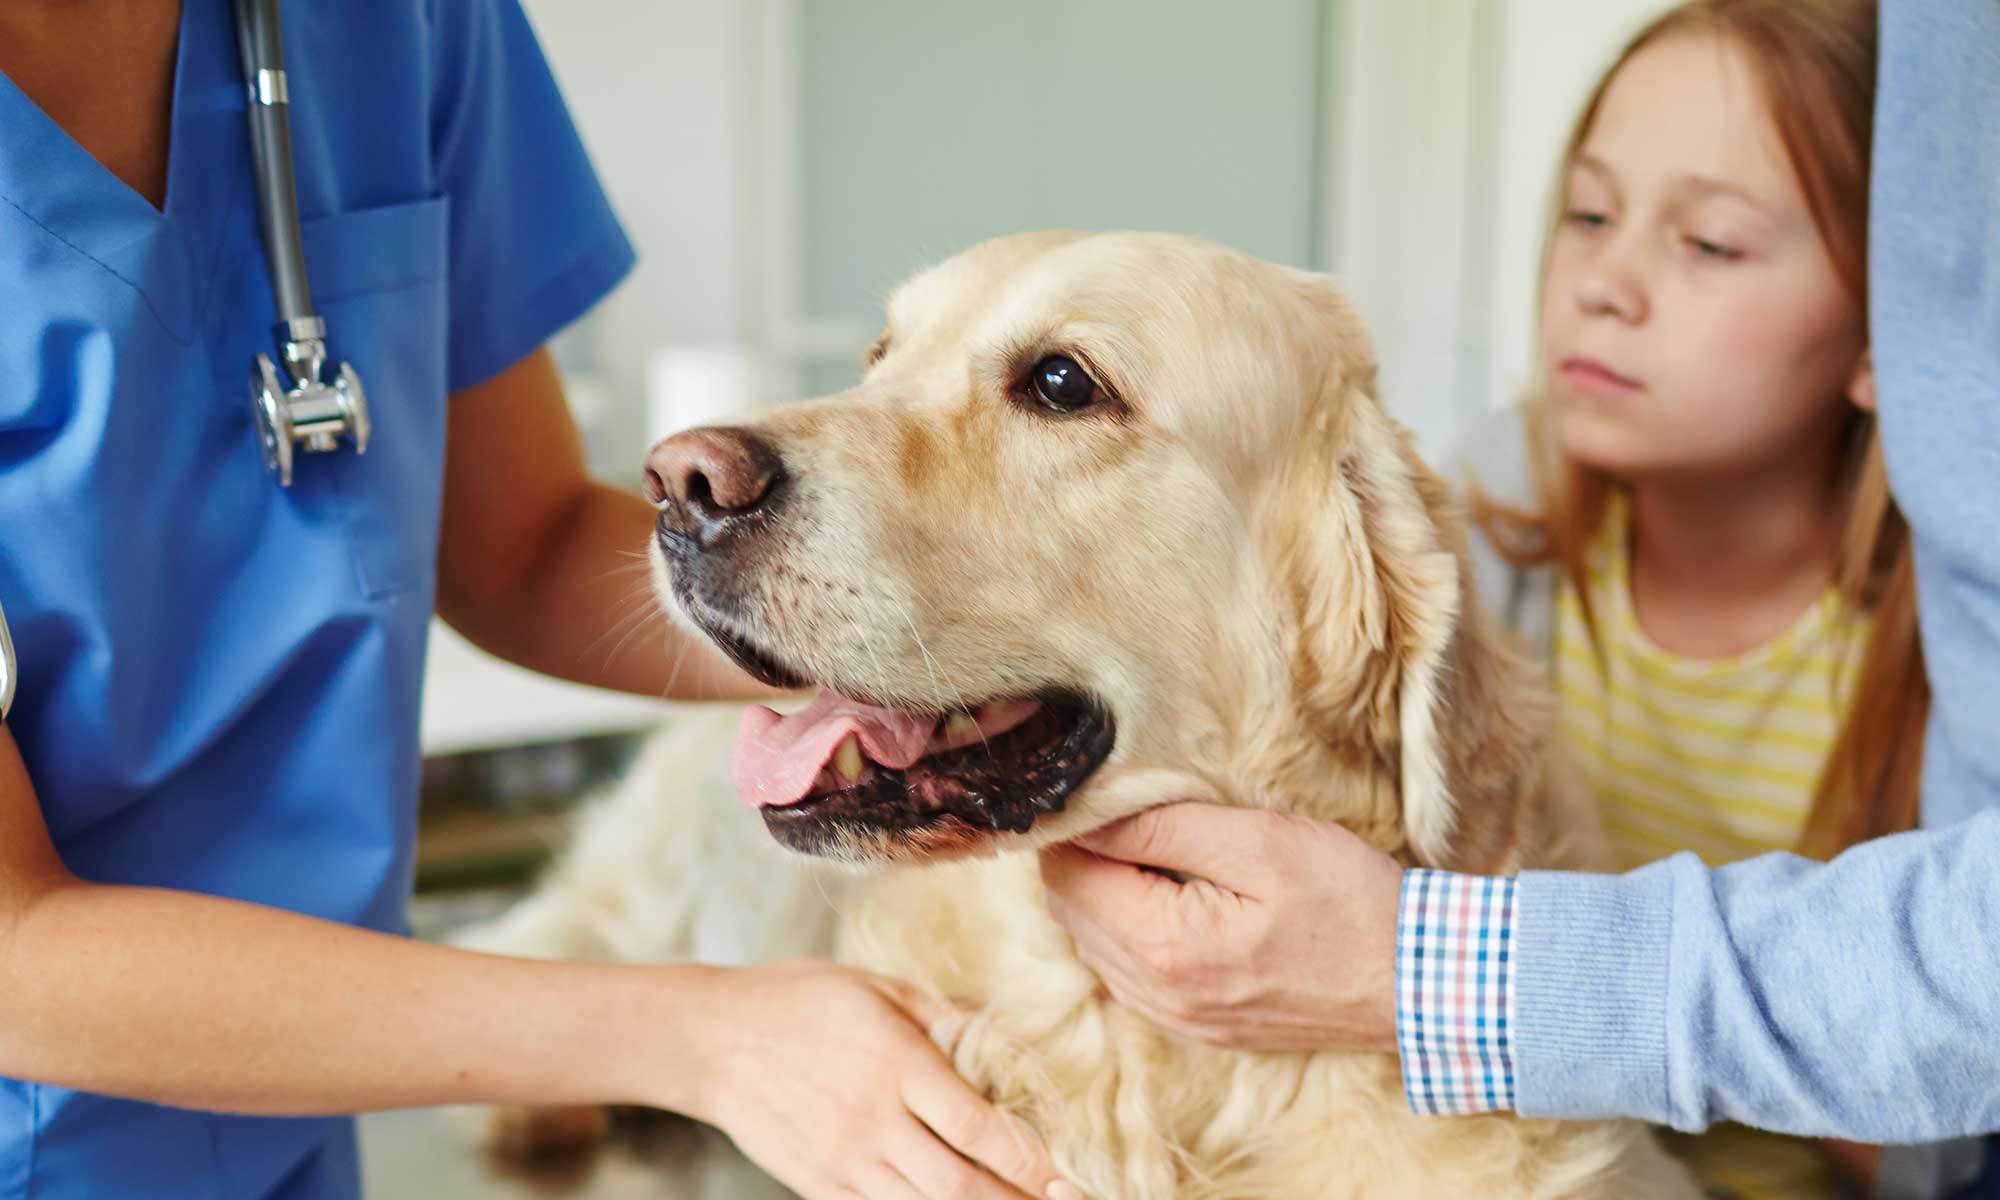 A golden retriever being examined at the vet office